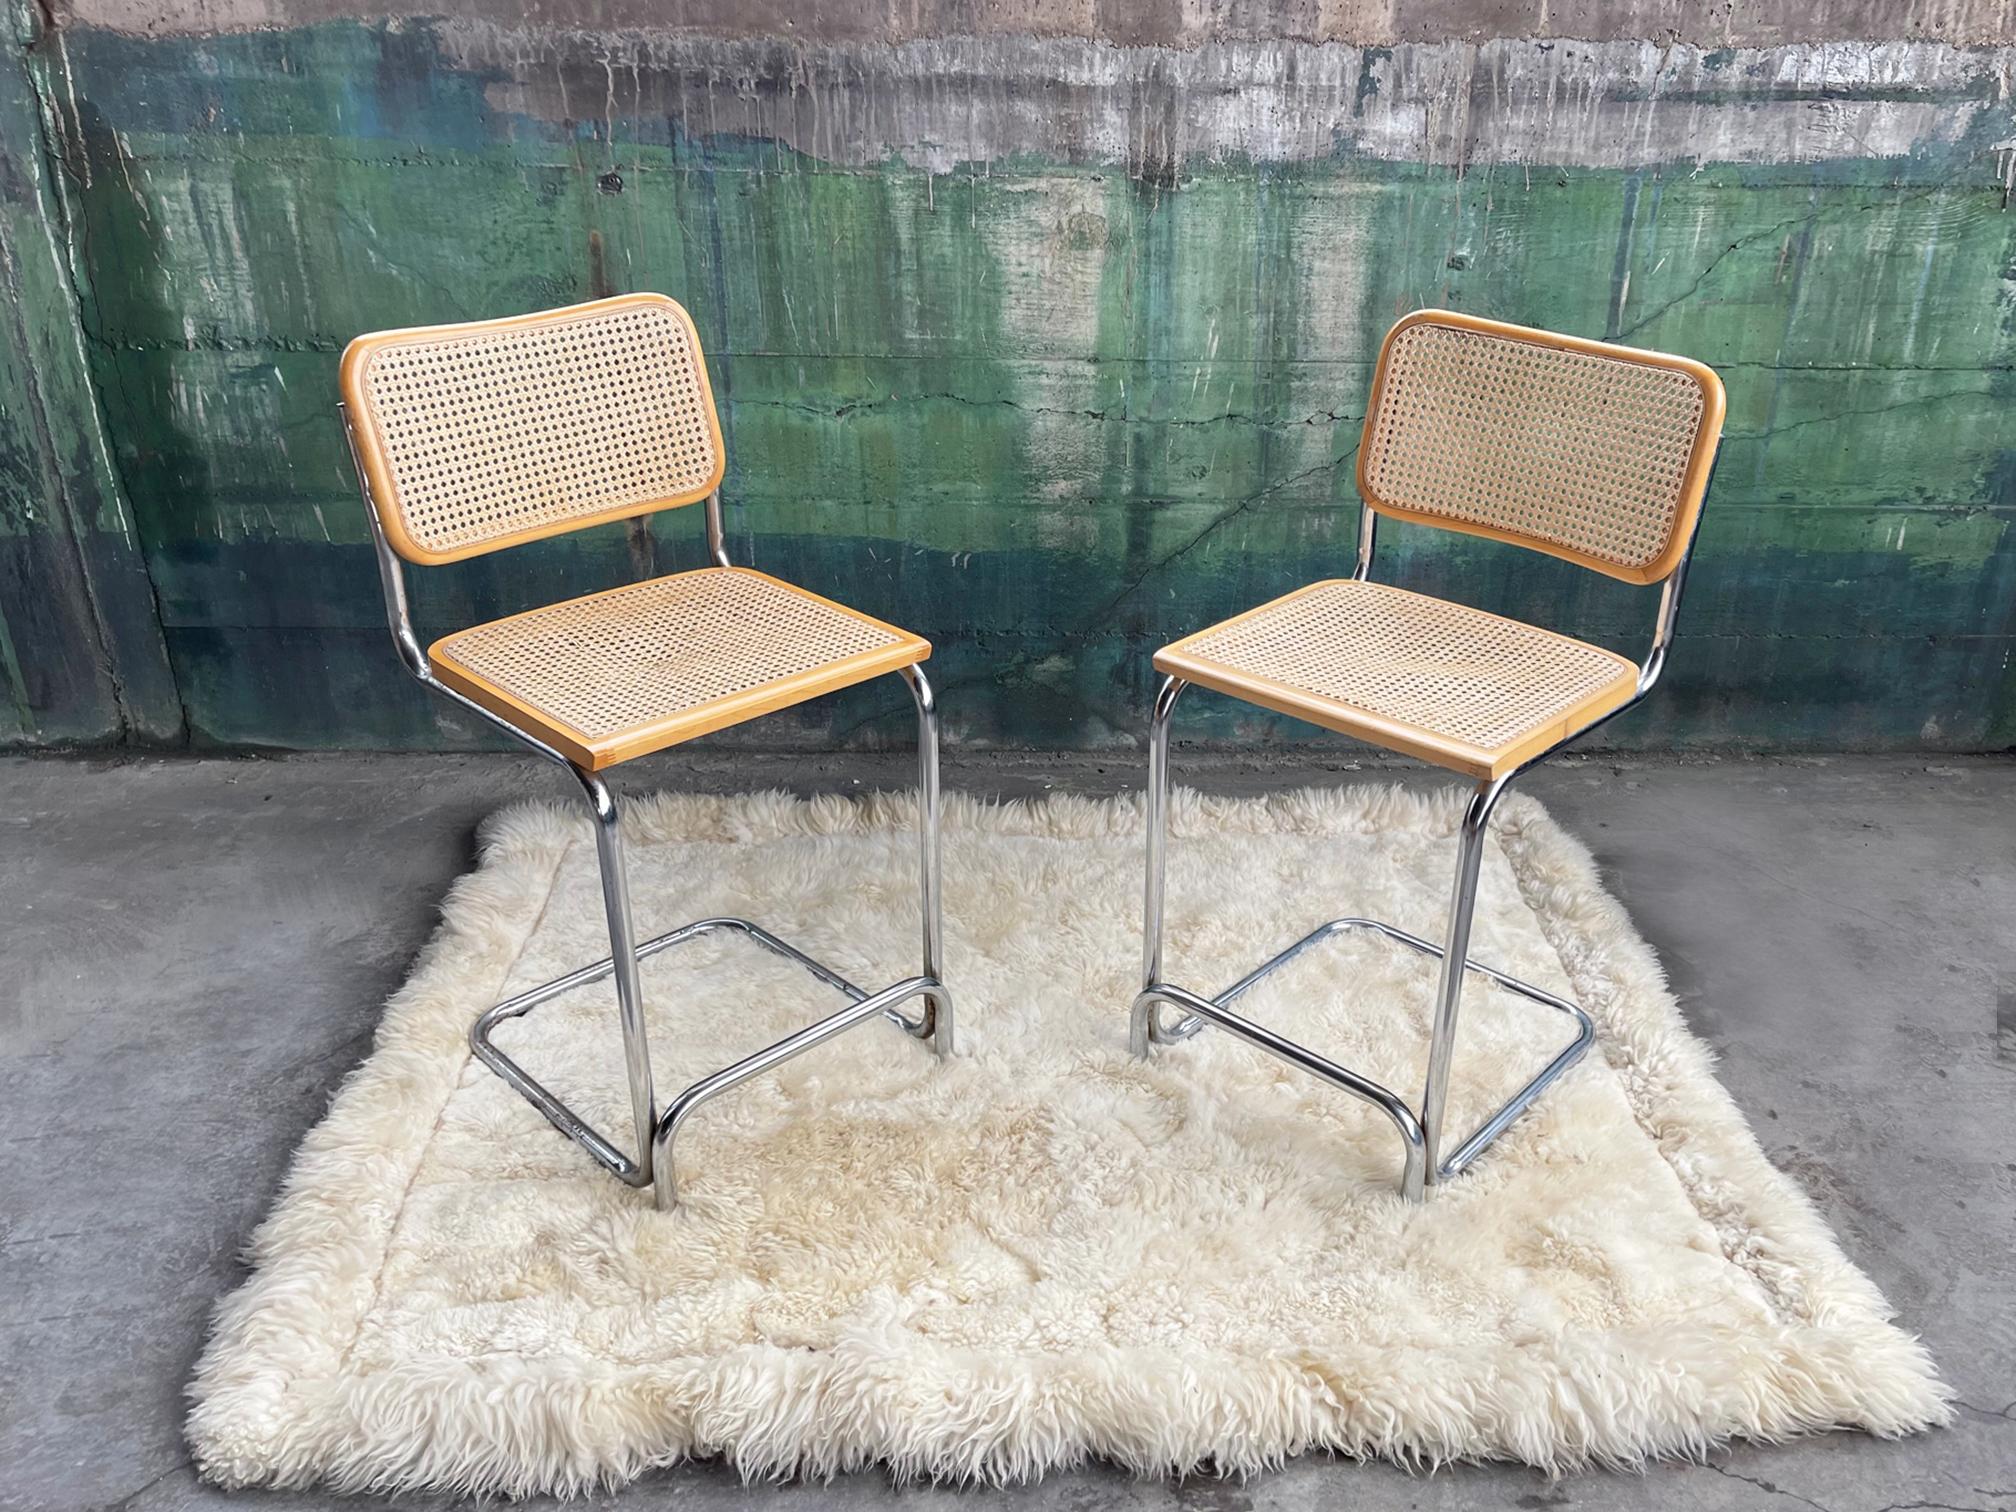 Very nice looking and strong Pair of very sturdy Marcel Breuer Italian Chrome and Birds eye woven cane seats and backs.  These also Feature the built-in footrests.

Very good vintage condition, and original vintage throughout.  There are no holes in